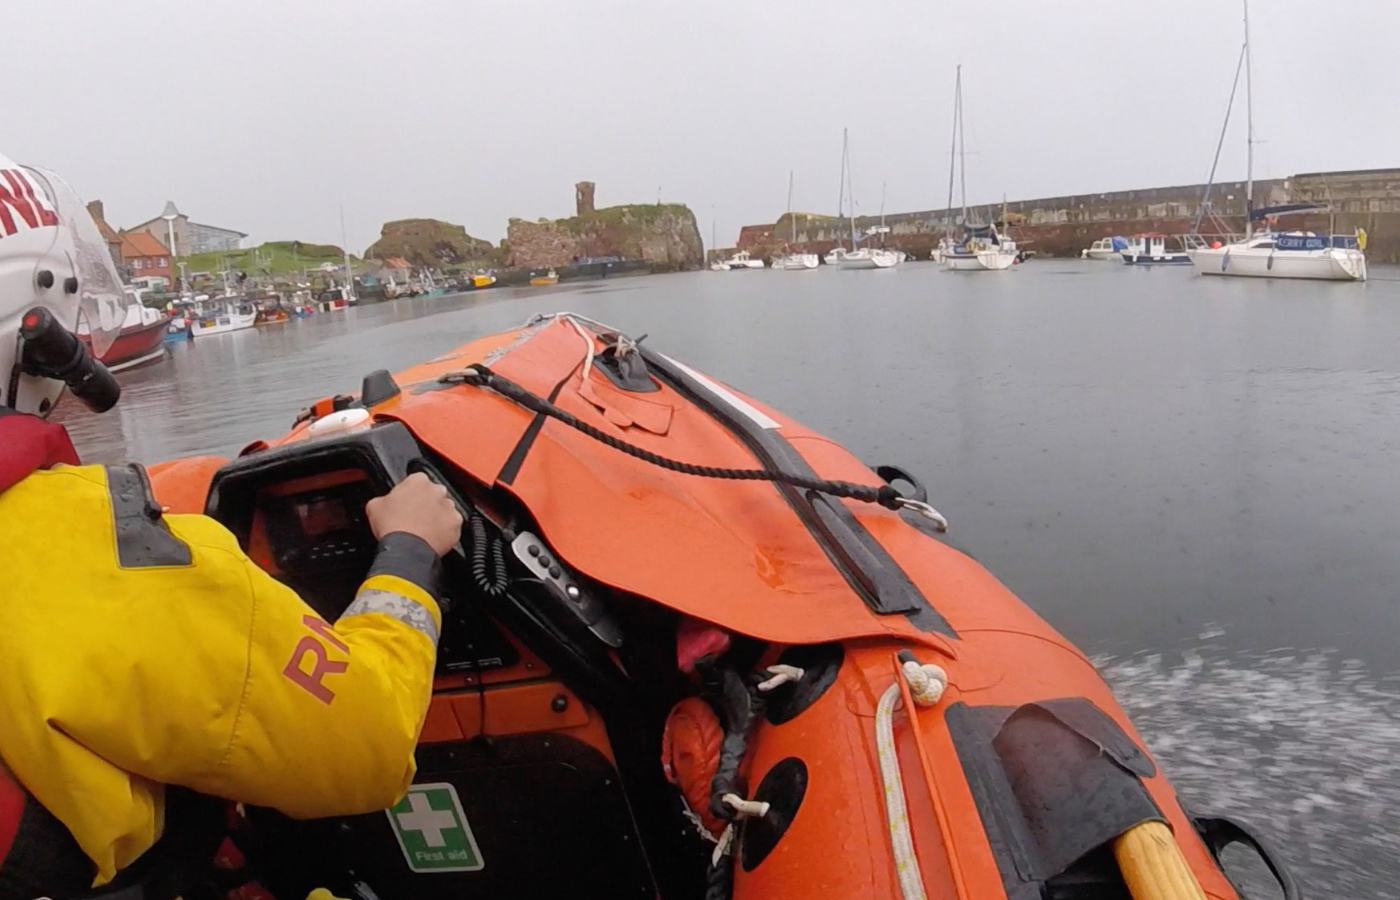 The D-class inshore lifeboat launched from Dunbar Harbour at around 5.45pm.